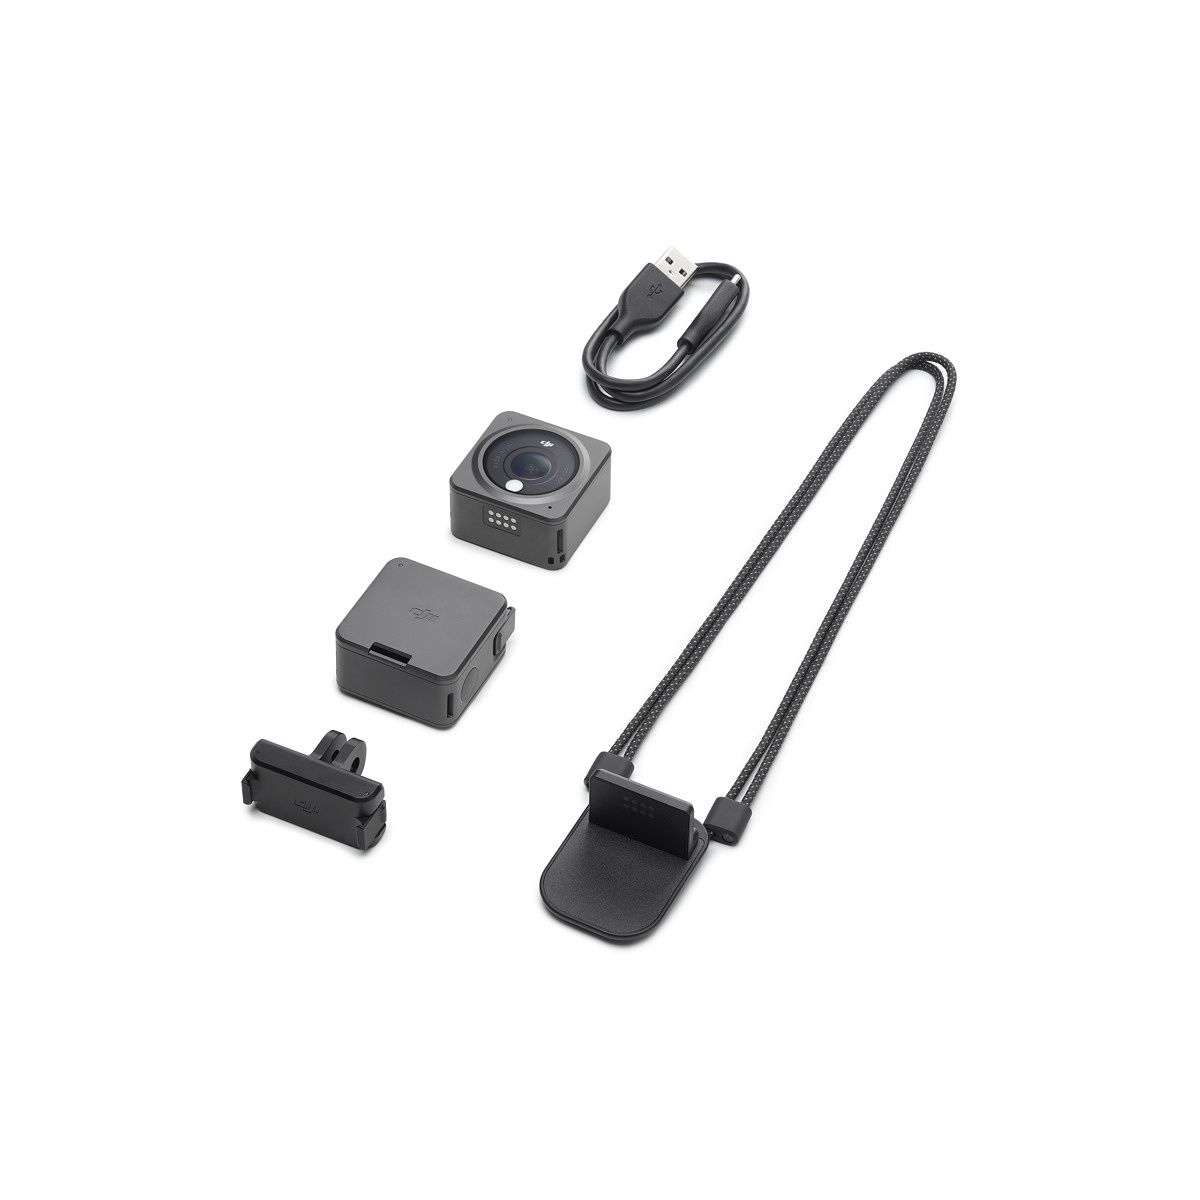 DJI Action 2 camera with accessories